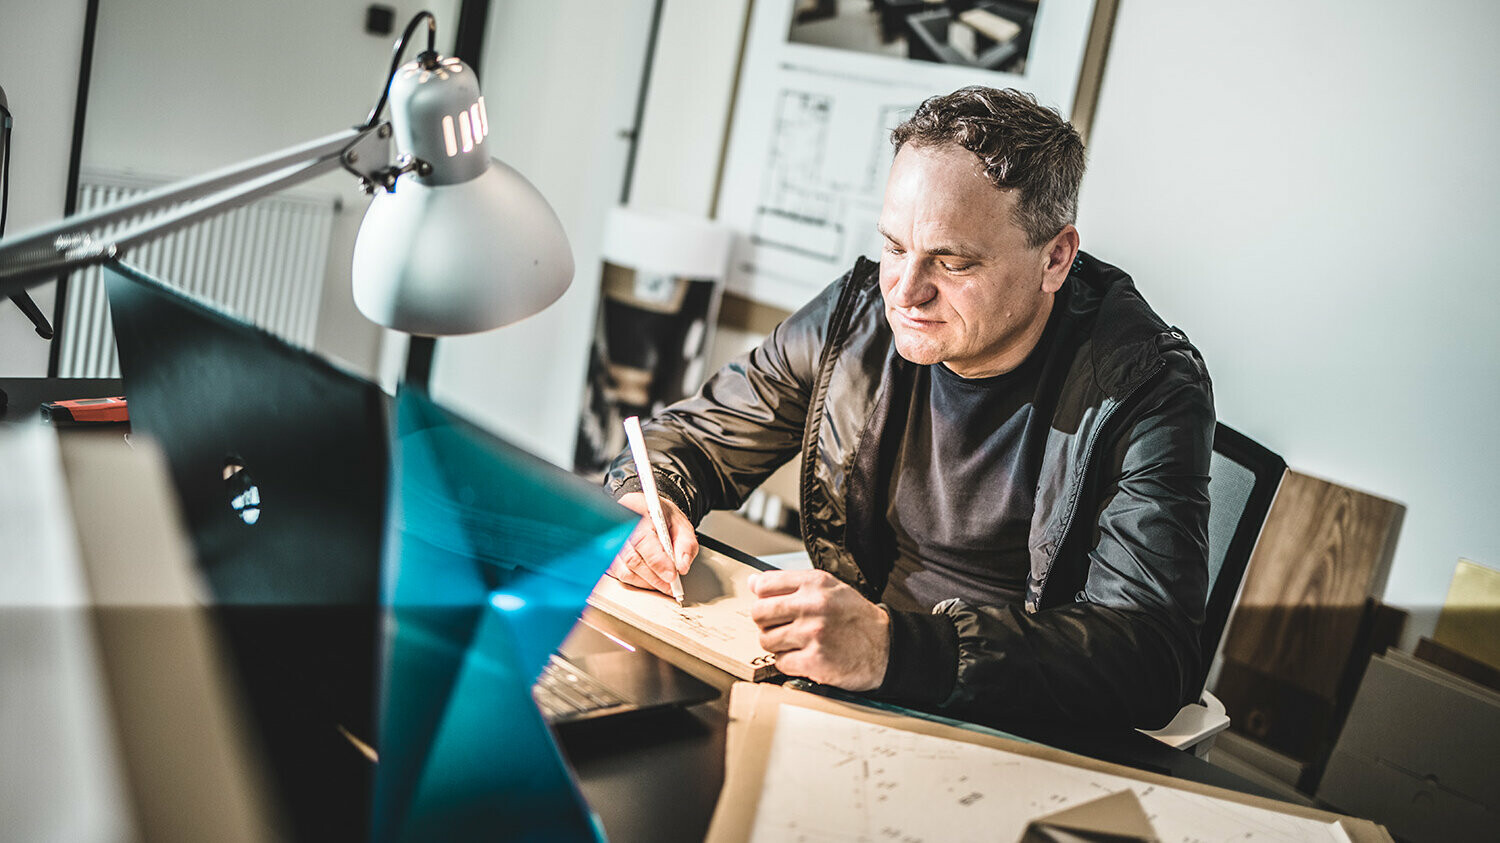 Portrait of Daniel Zerzán at his office, his view is directed towards the notepad lying before him and he is writing on it.